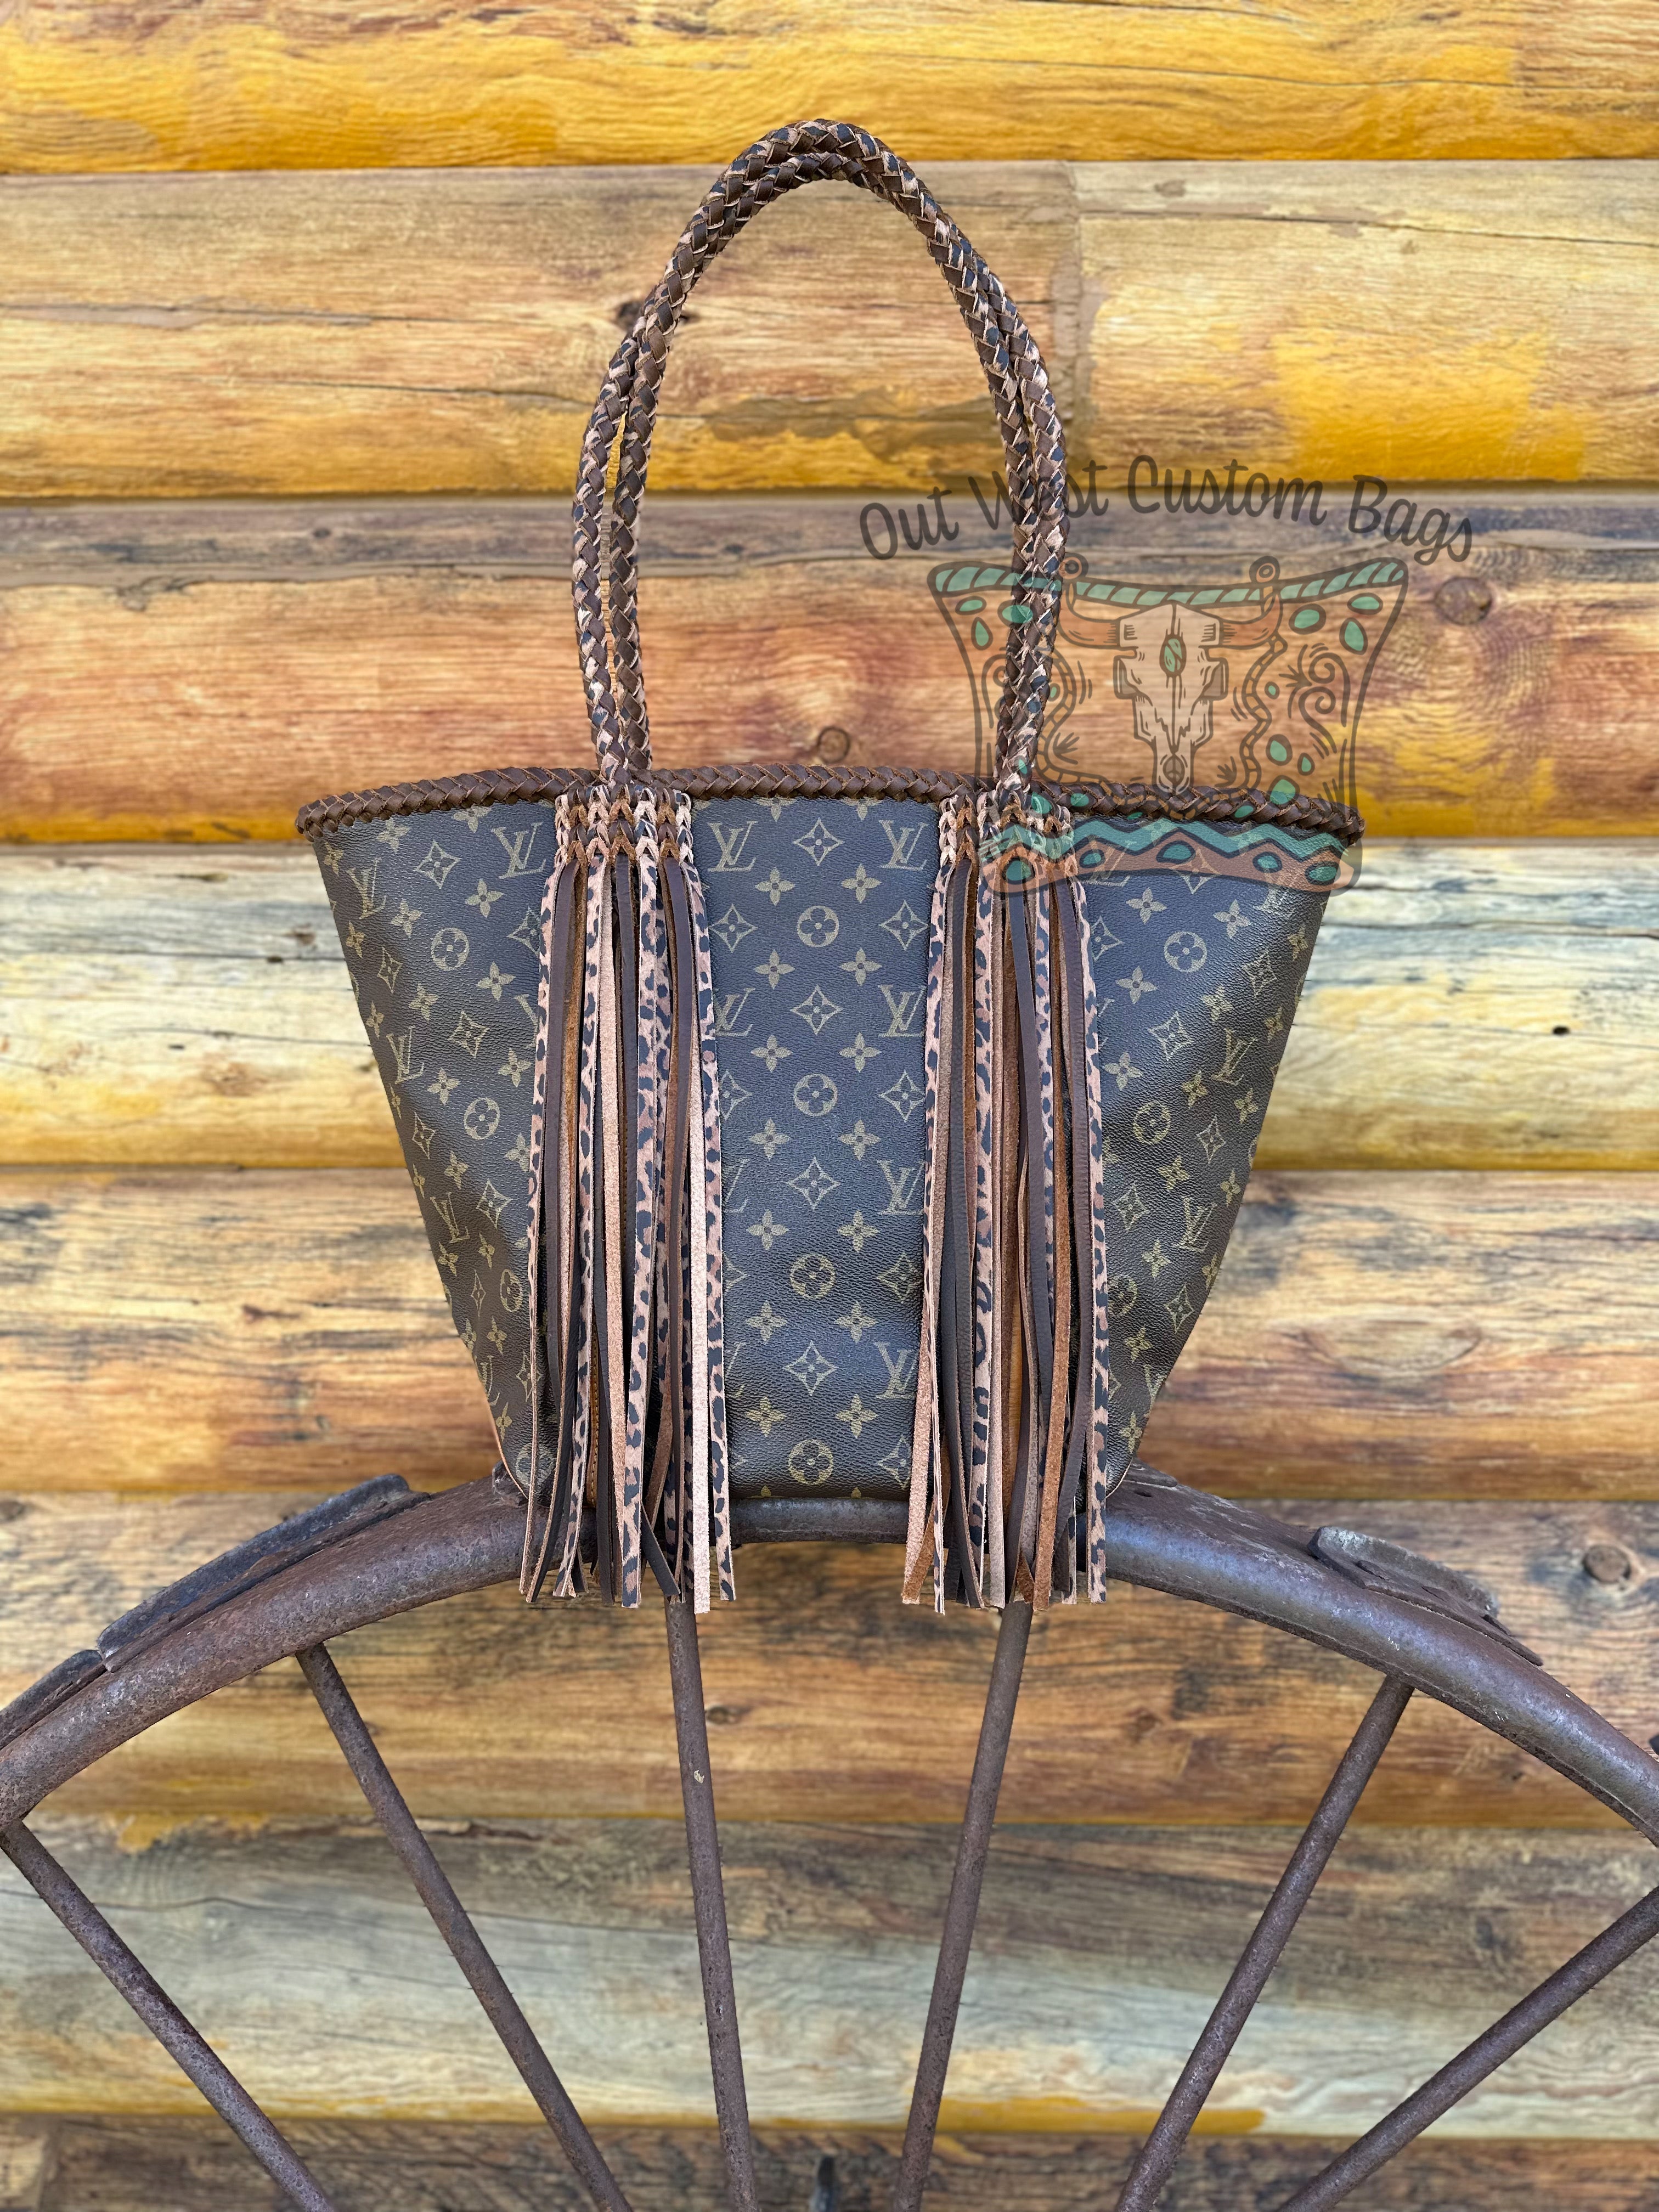 Out West Damier Azur Neverfull MM Braided Leather Fringe – Out West Custom  Bags